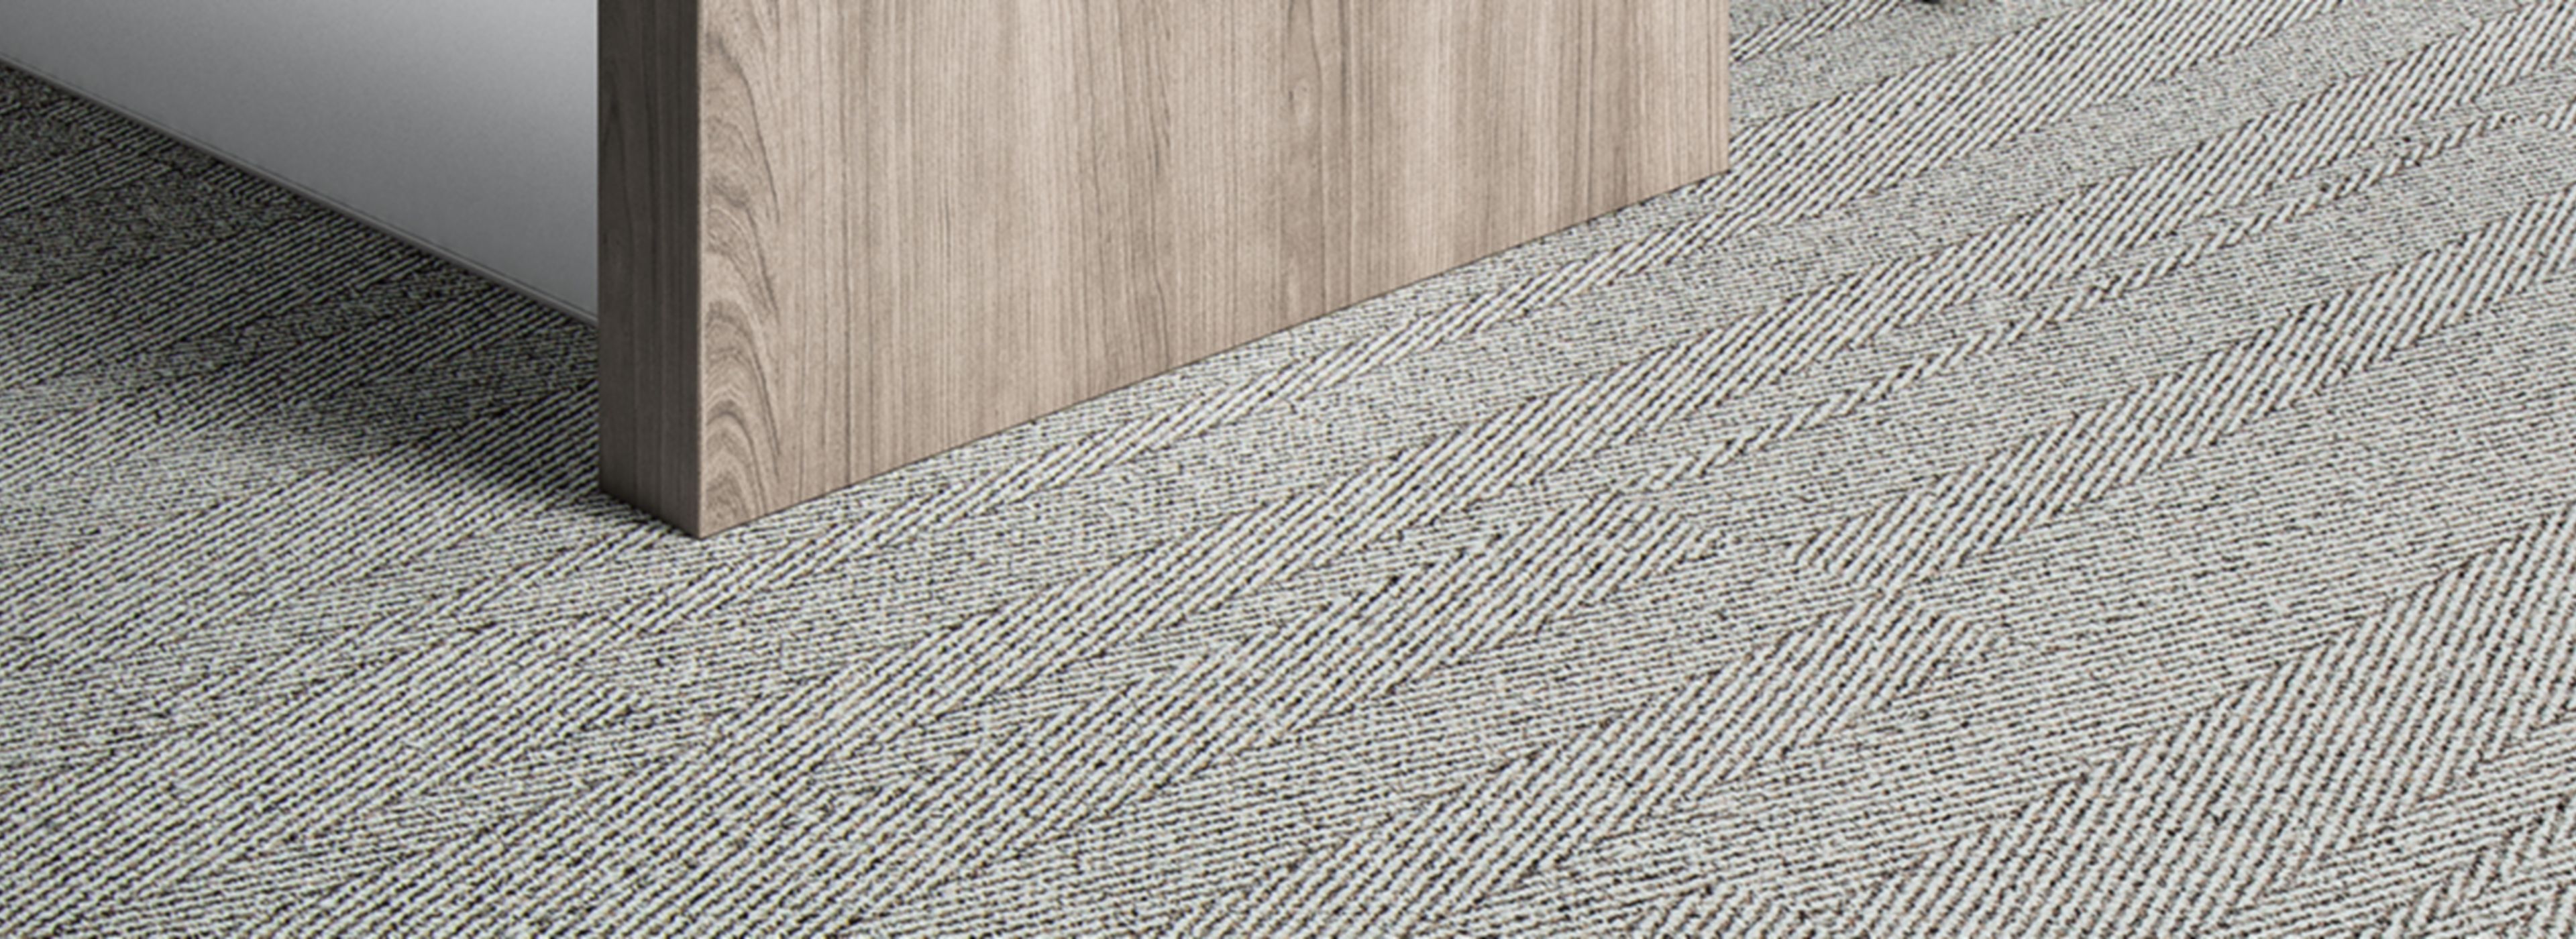 Interface Stitch in Timeplank carpet tile  in office with wood desk and chair image number 1